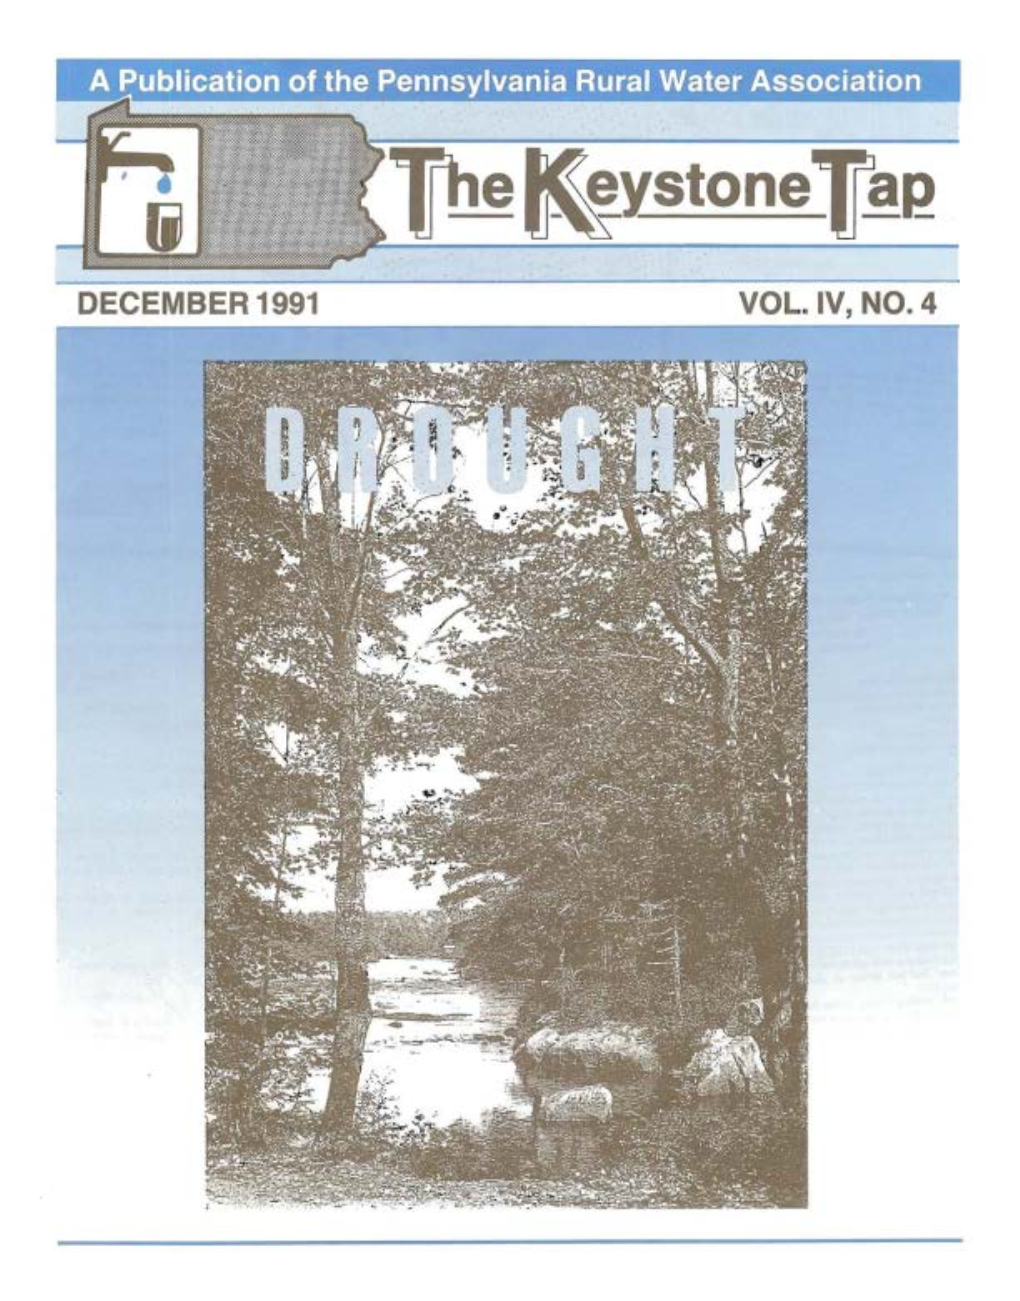 Keystone Tap Magazine Was Nominated As One of the Five Best State Publications of the Year